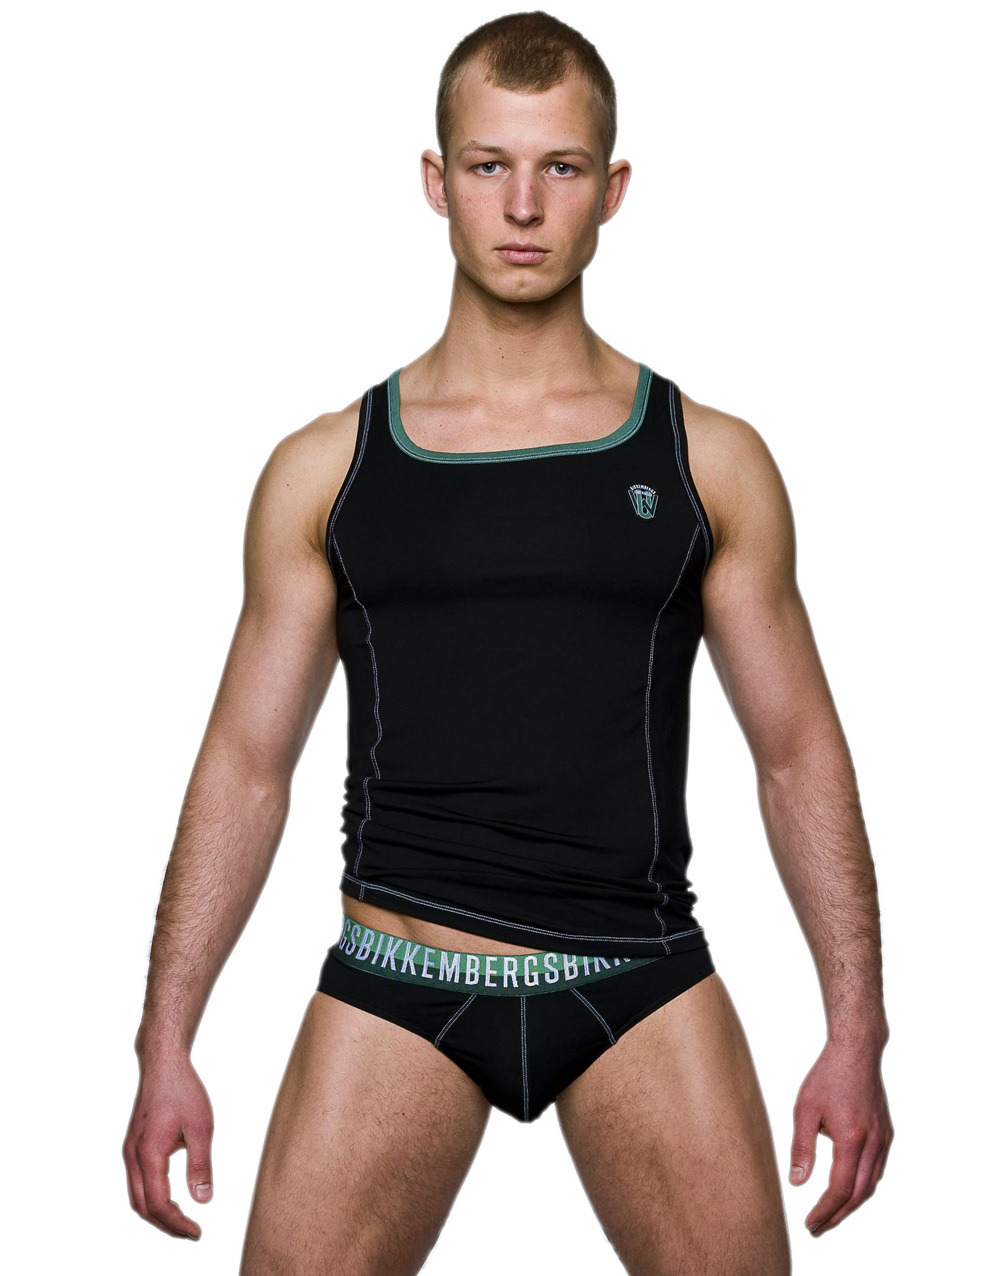 Bikkembergs Underwear: Action or Lounge Time?